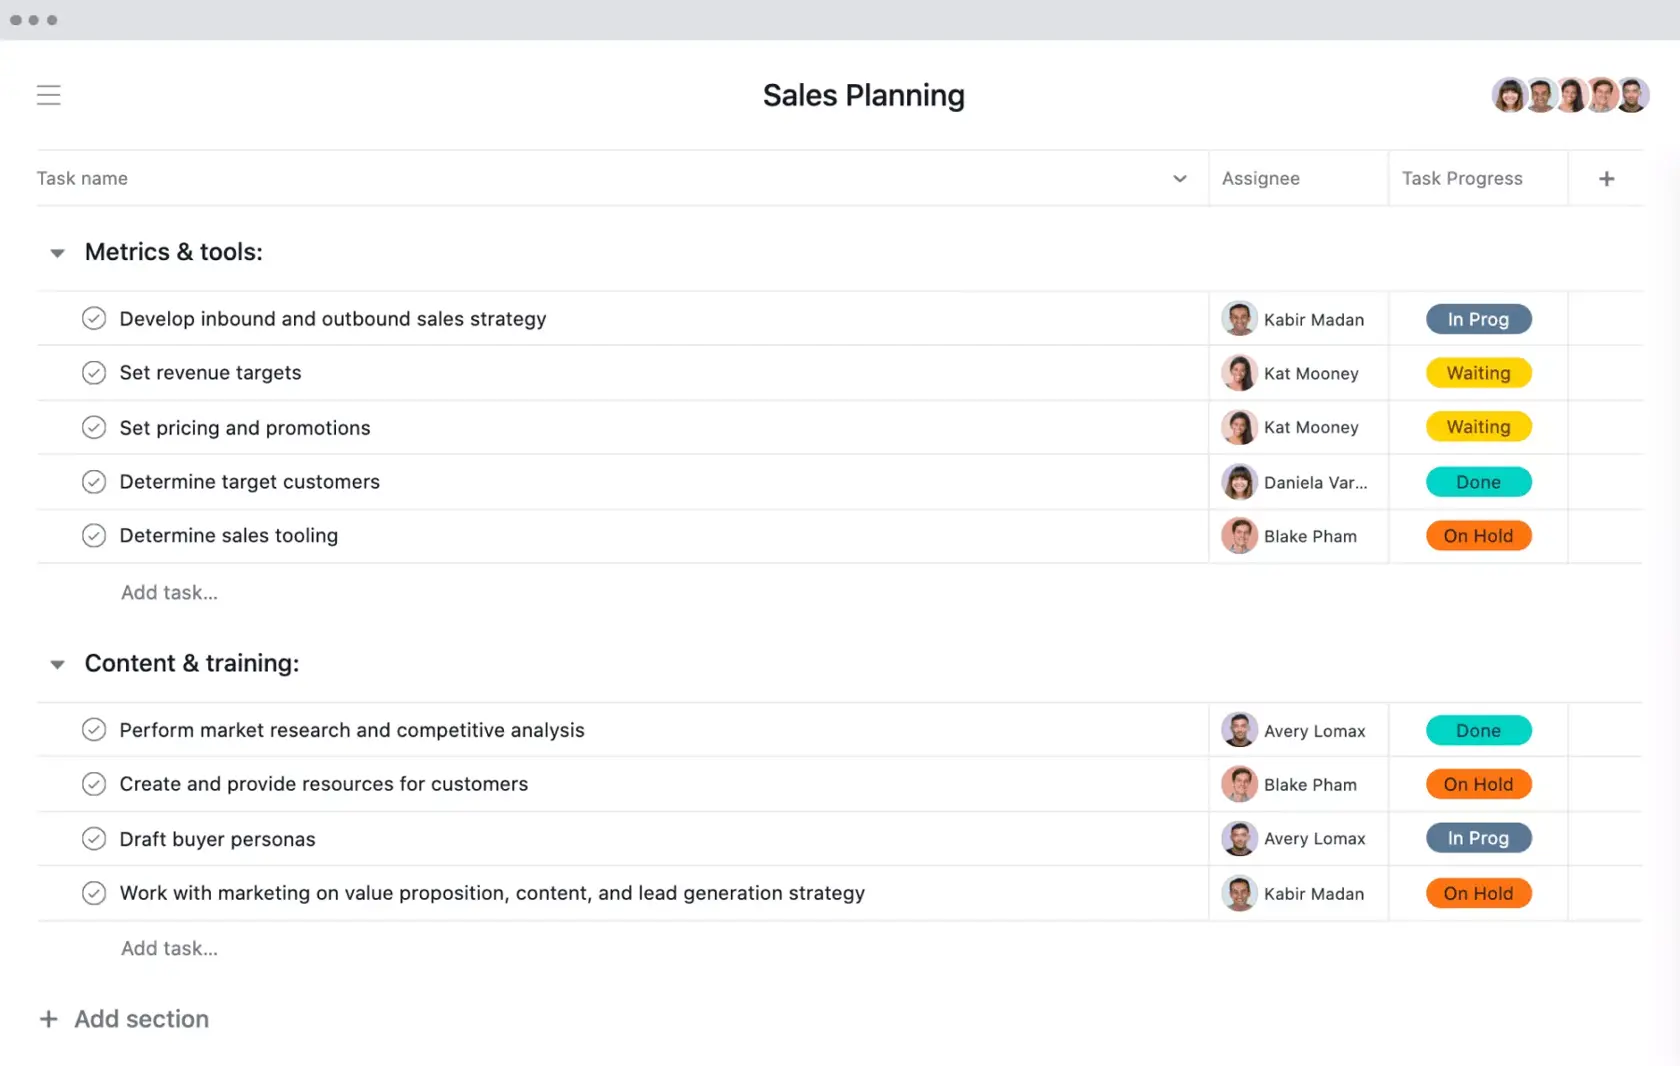 [Old Product UI] Sales planning project in Asana, spreadsheet-style view with project deliverables (Lists)